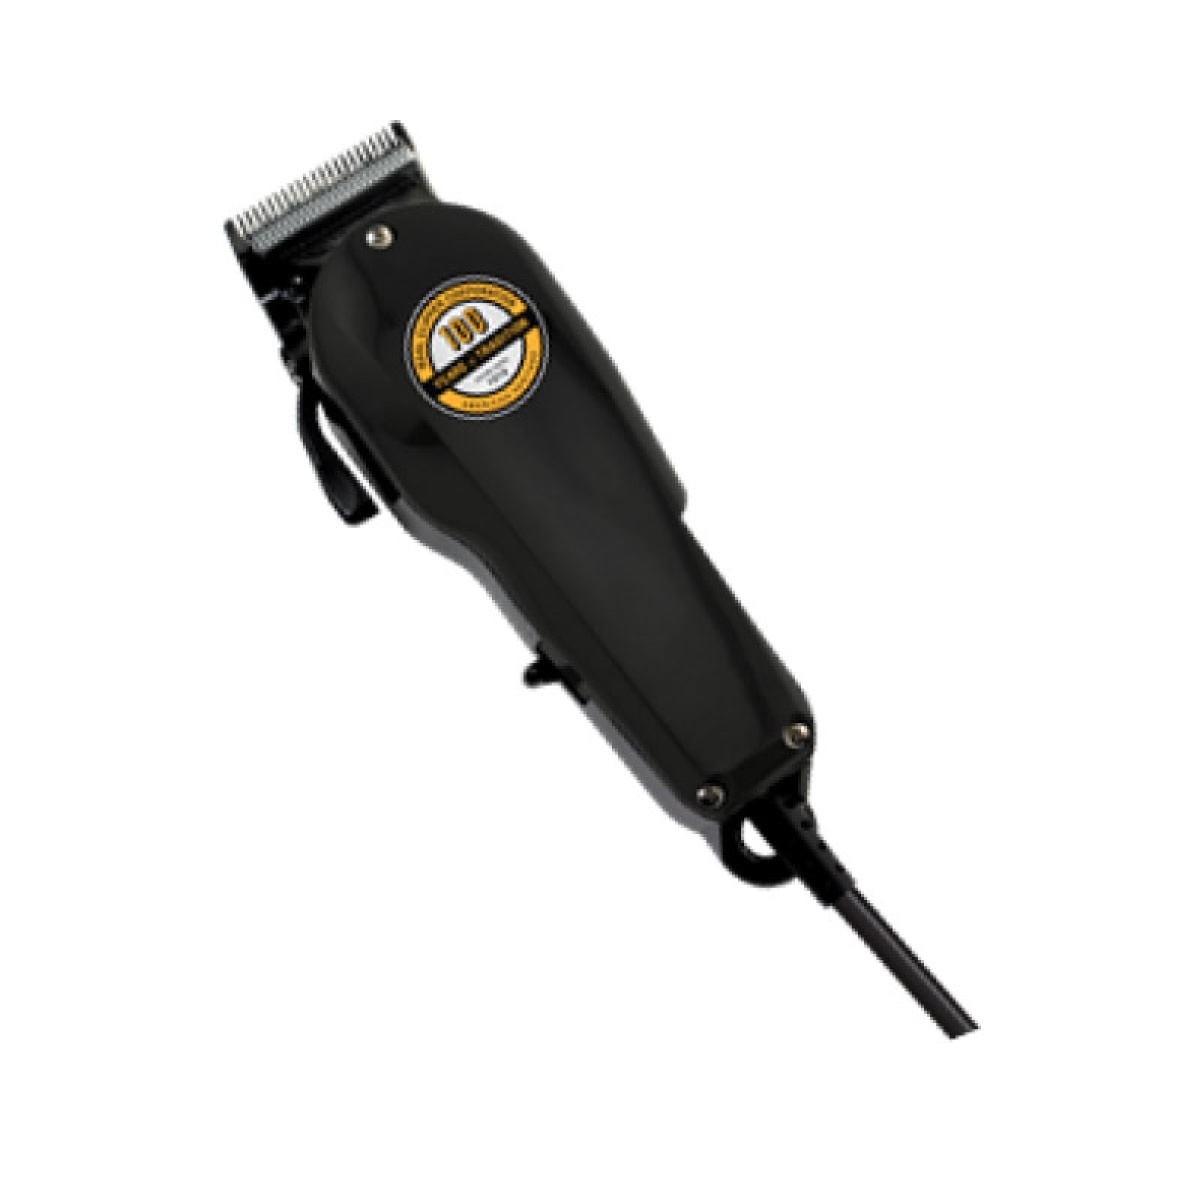 Wahl 100 Year corded Clipper 80619-016-0